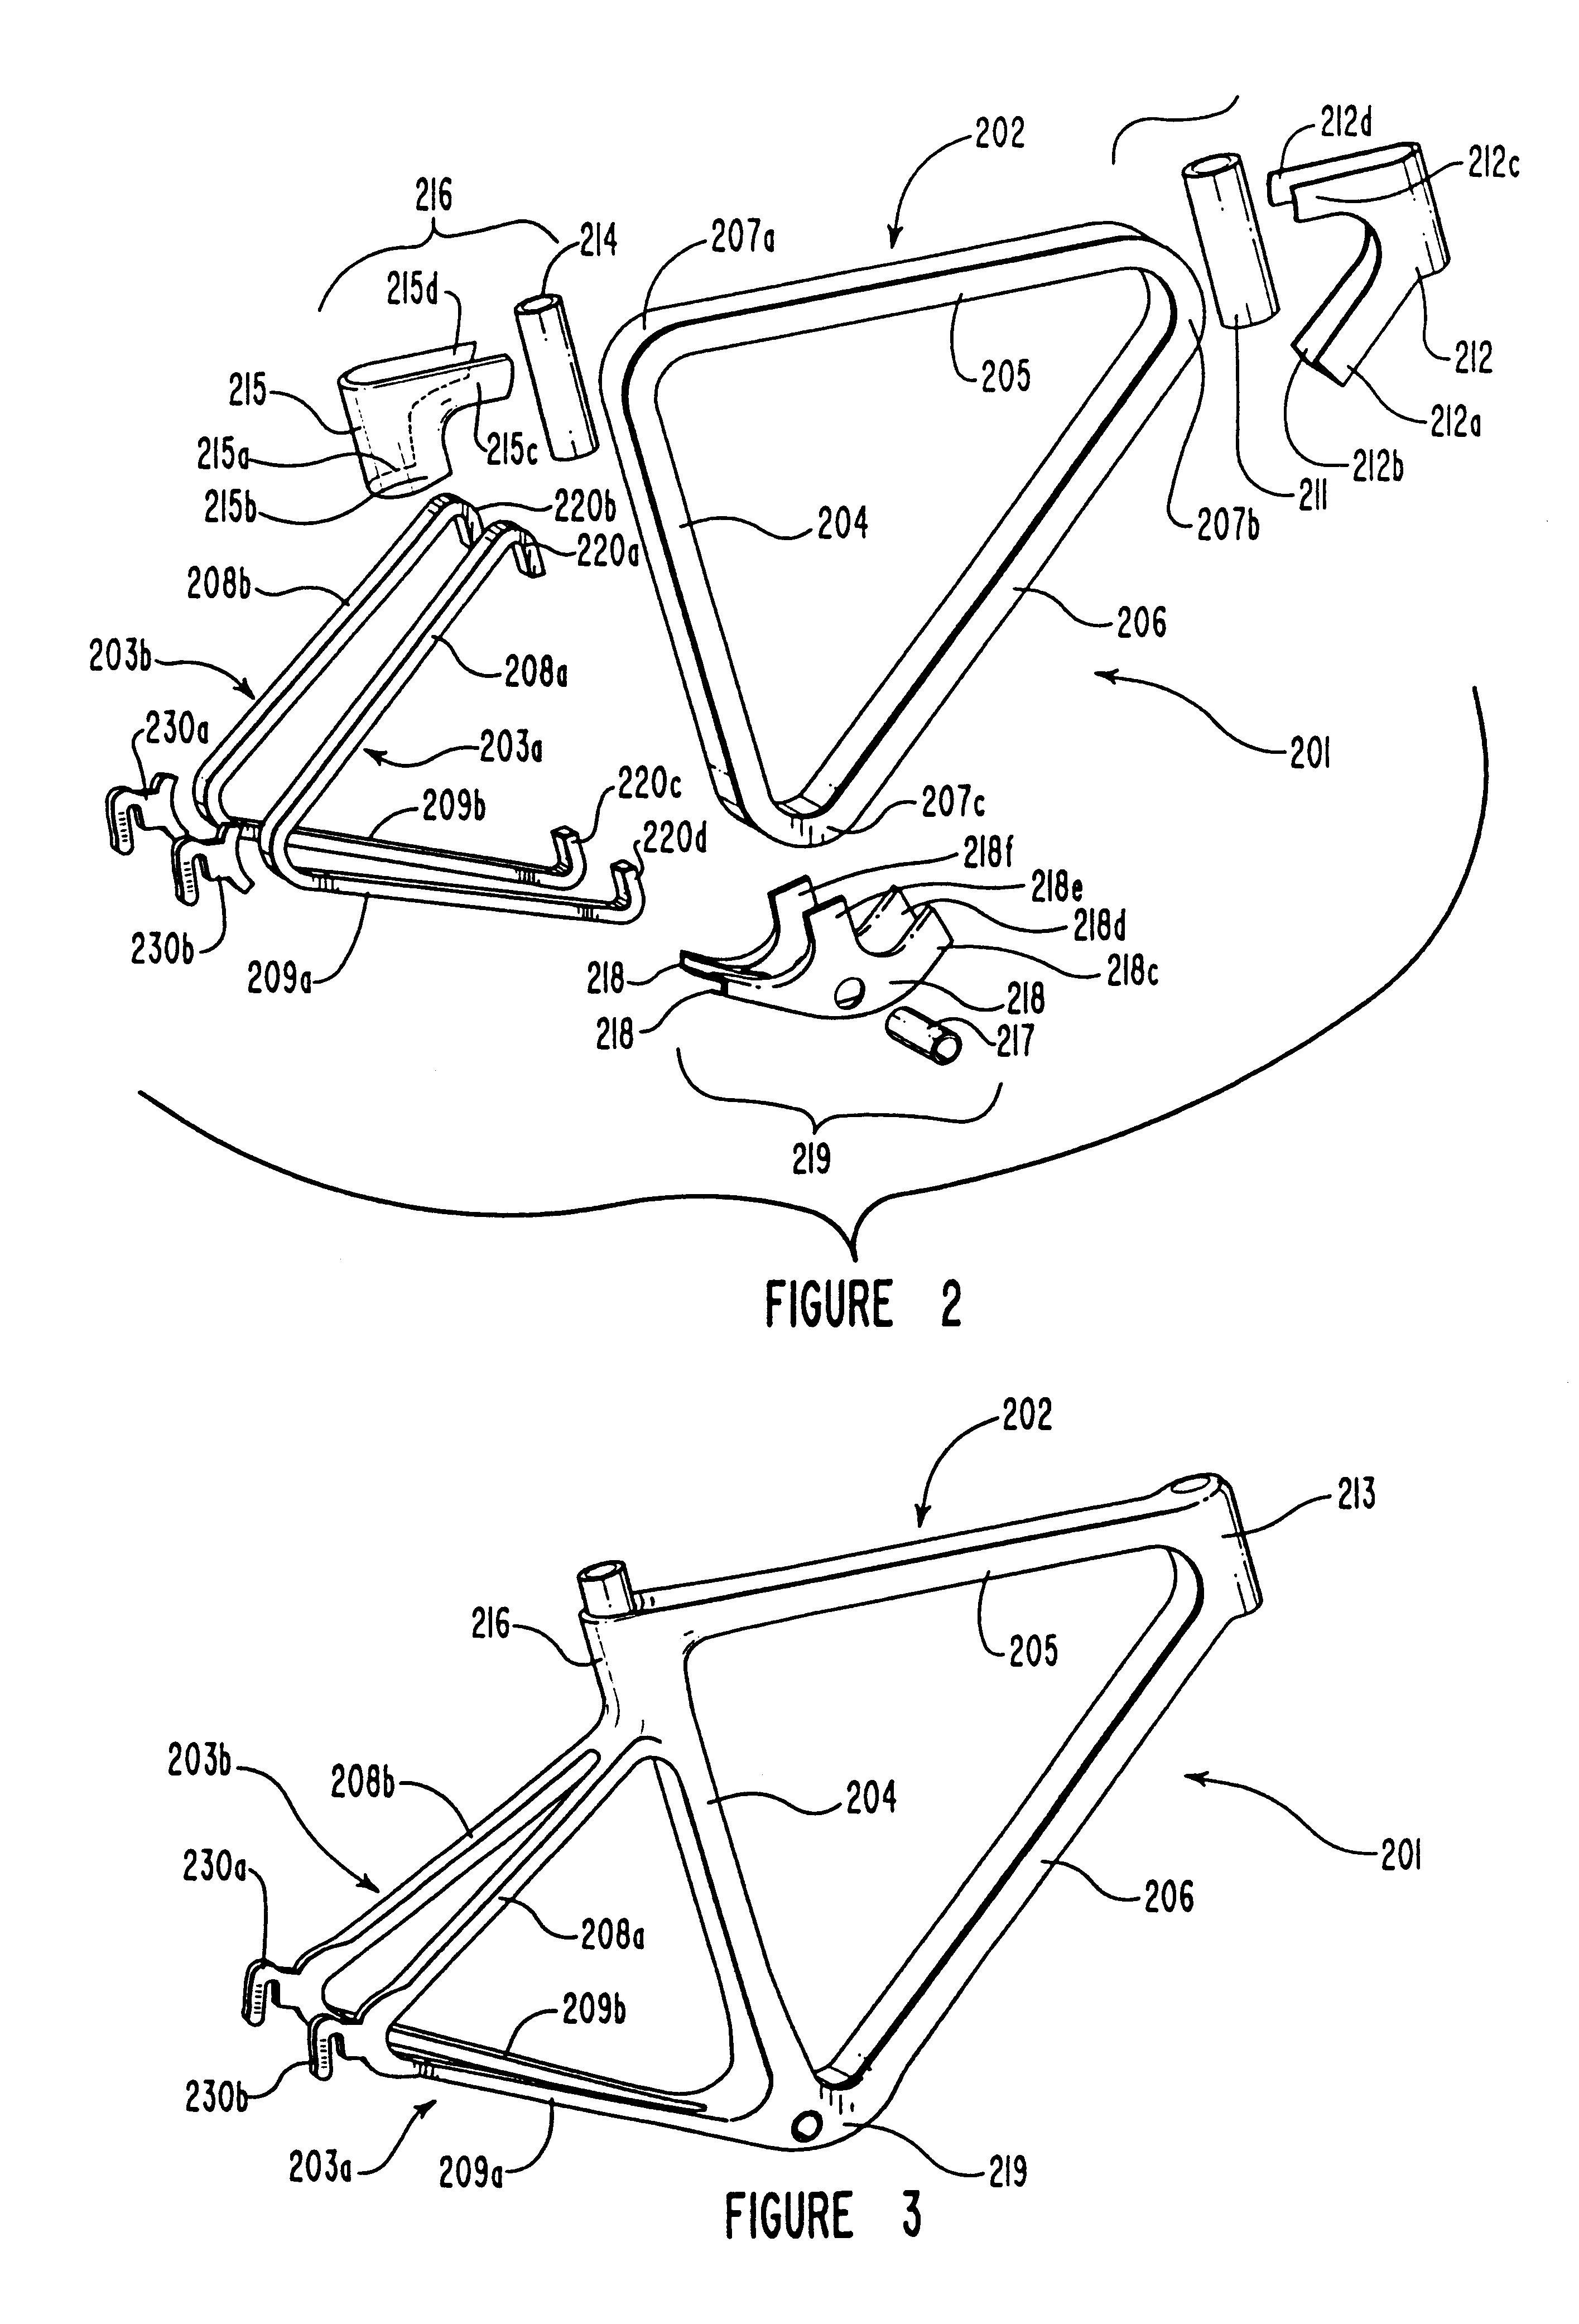 Net shape filament winding manufacturing process, articles made therefrom and composite bicycle fork and other components